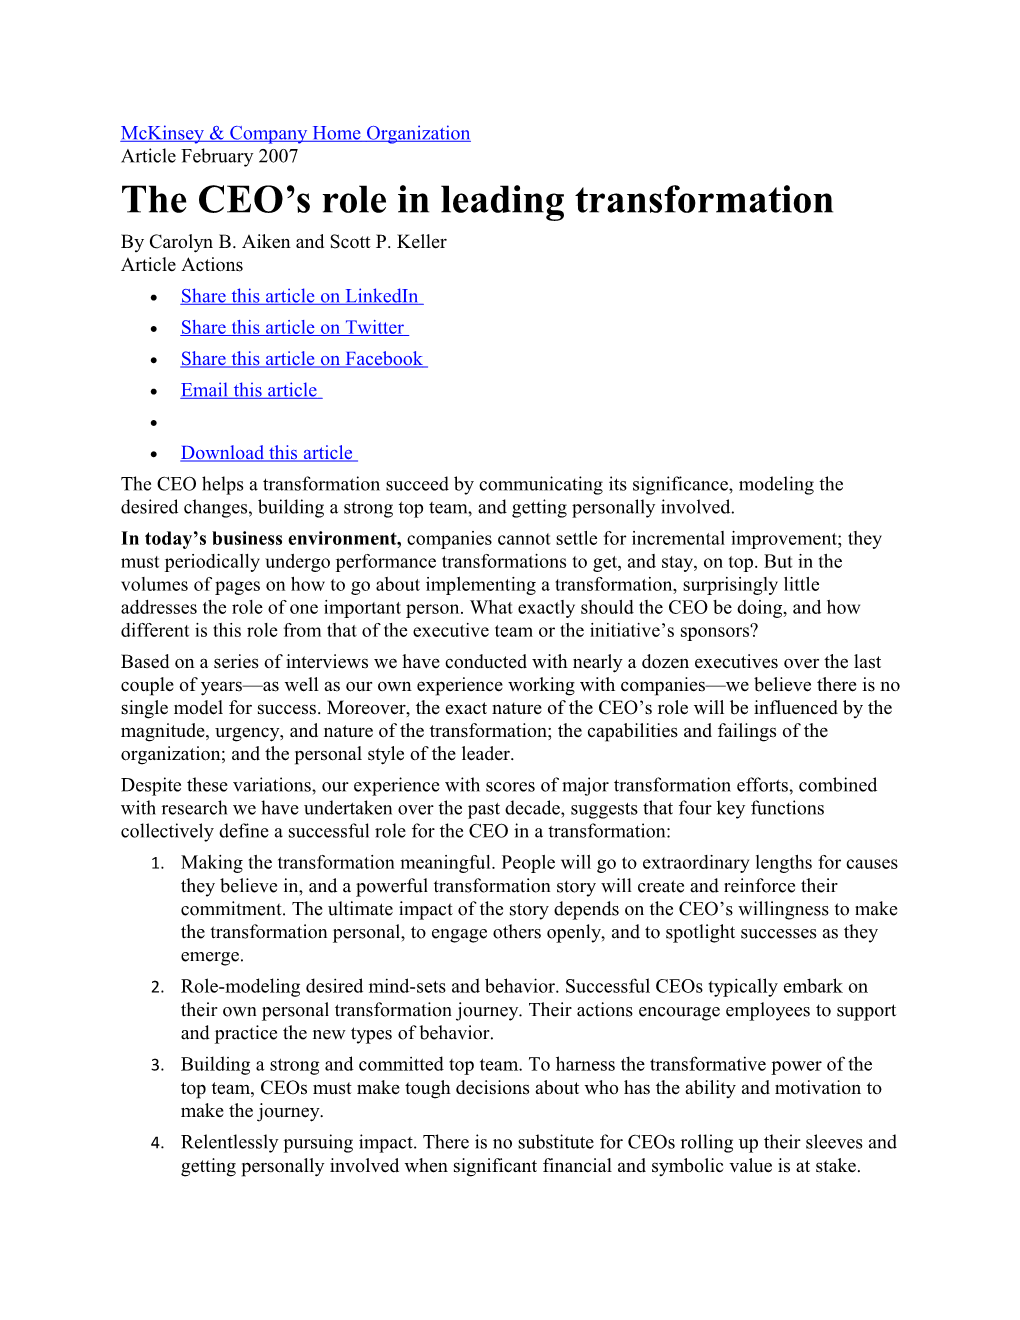 The CEO S Role in Leading Transformation